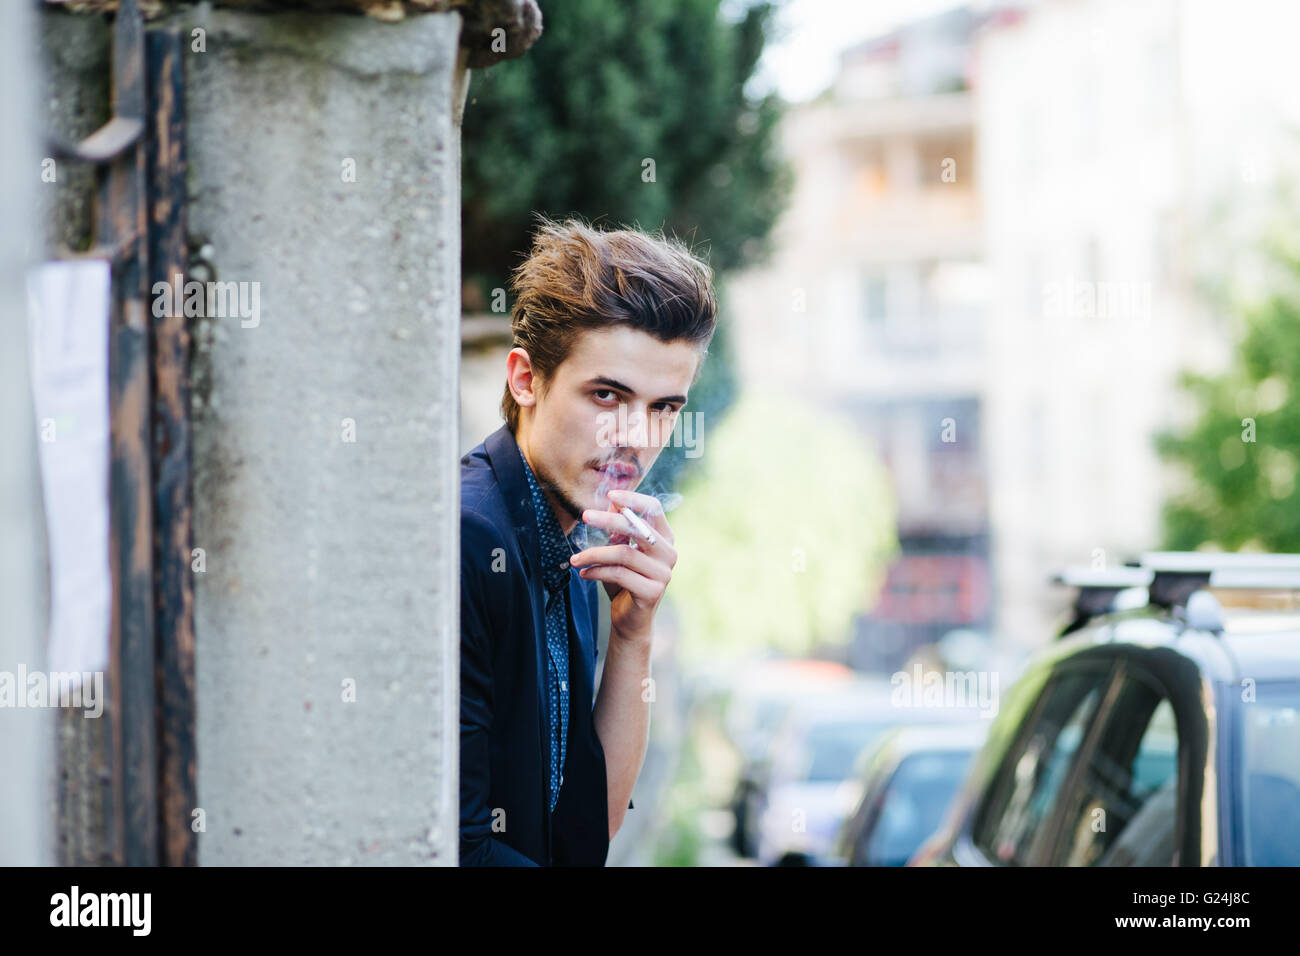 Portrait of a young man smoking Stock Photo